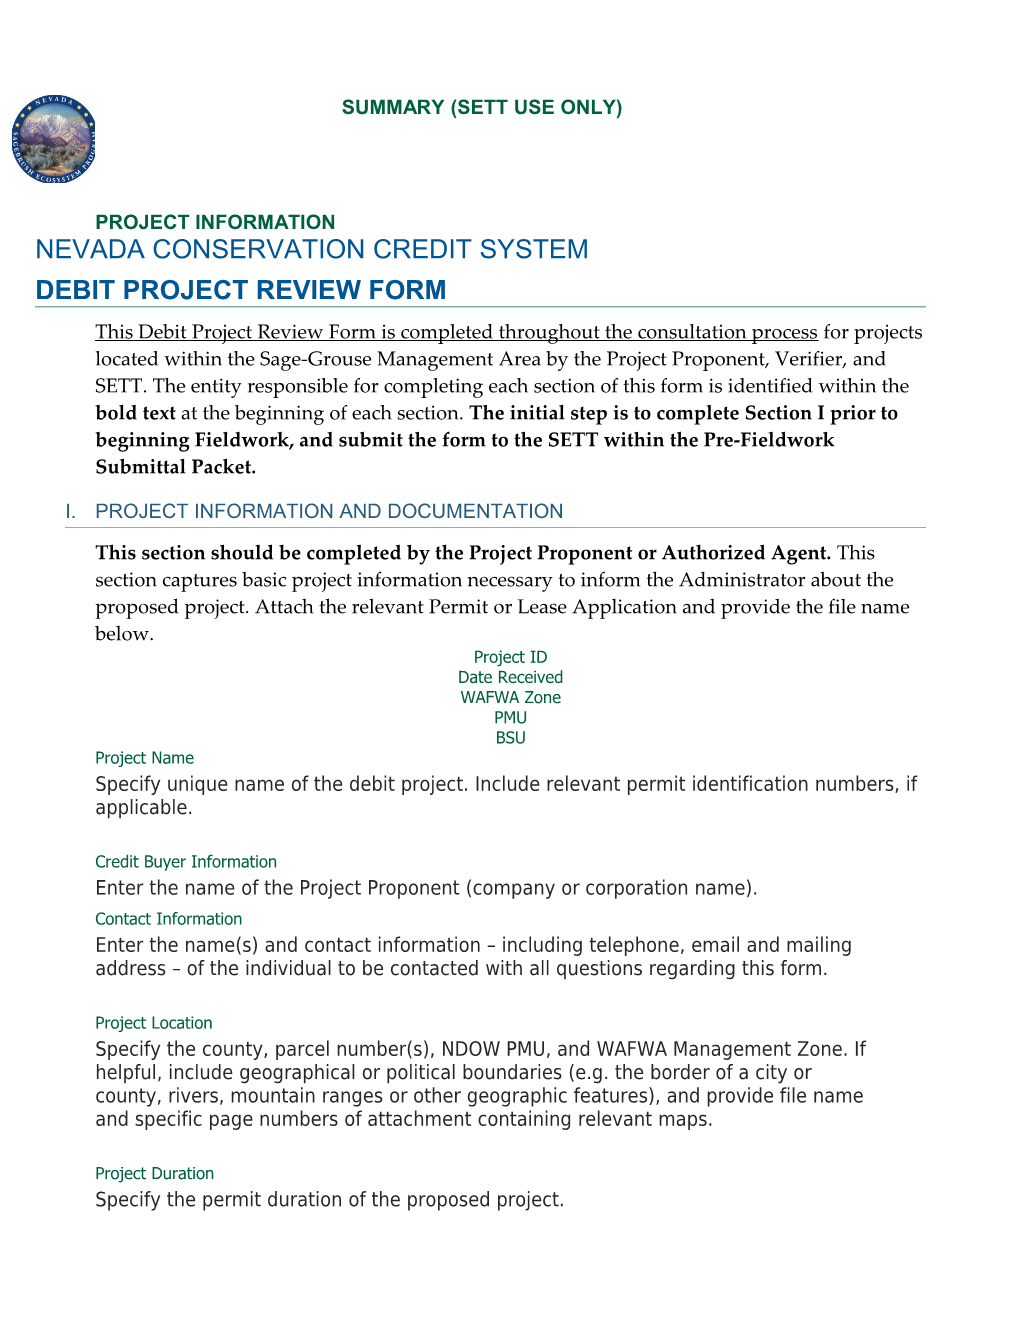 Nevada Conservation Credit System Debit Project Review Formpage 1